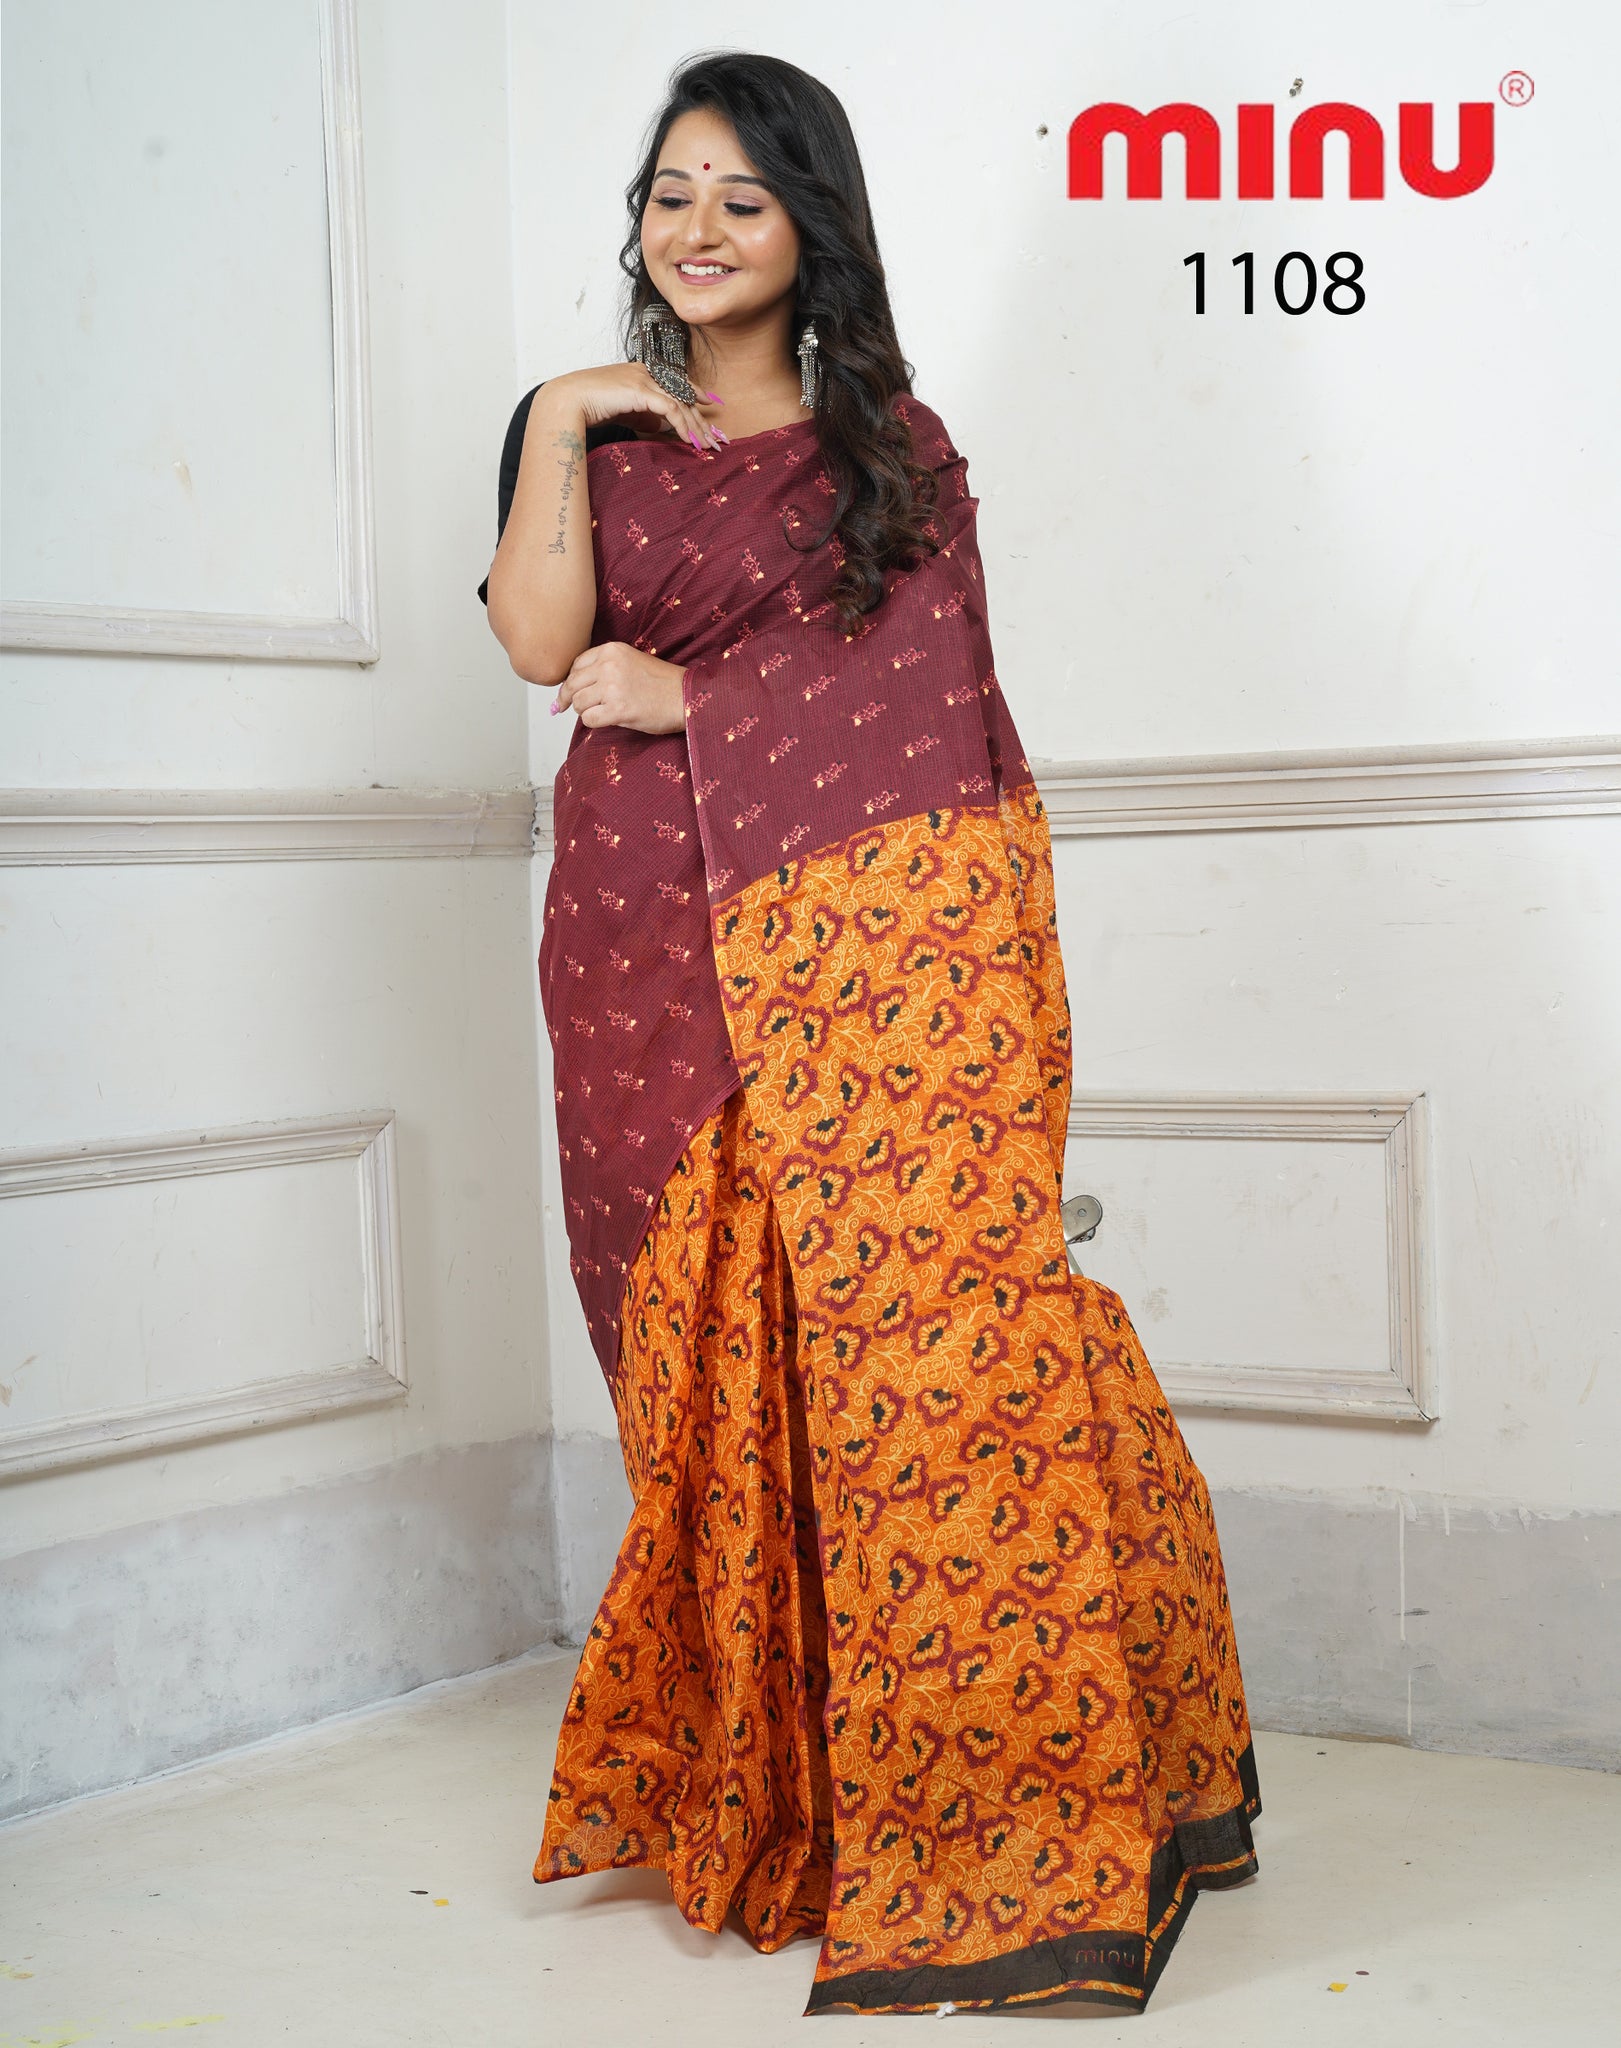 Brown and Orange Saree with Tight Knit Patterns